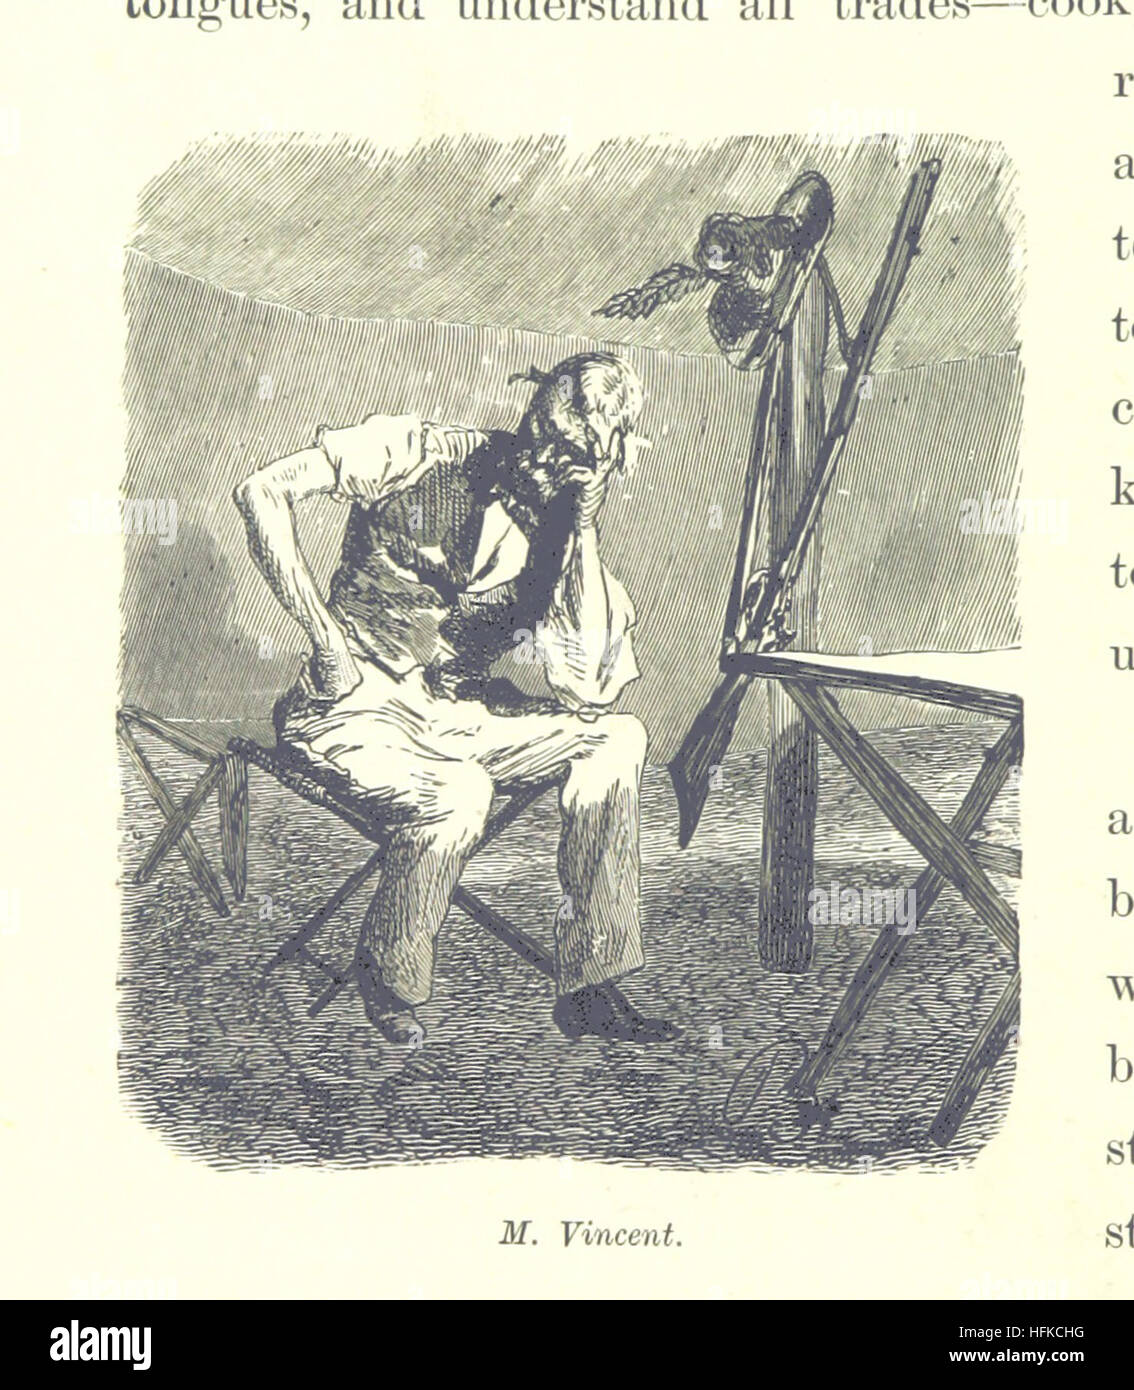 Morocco: its people and places ... Translated by C. Rollin-Tilton. With ... illustrations Image taken from page 120 of 'Morocco its people and Stock Photo